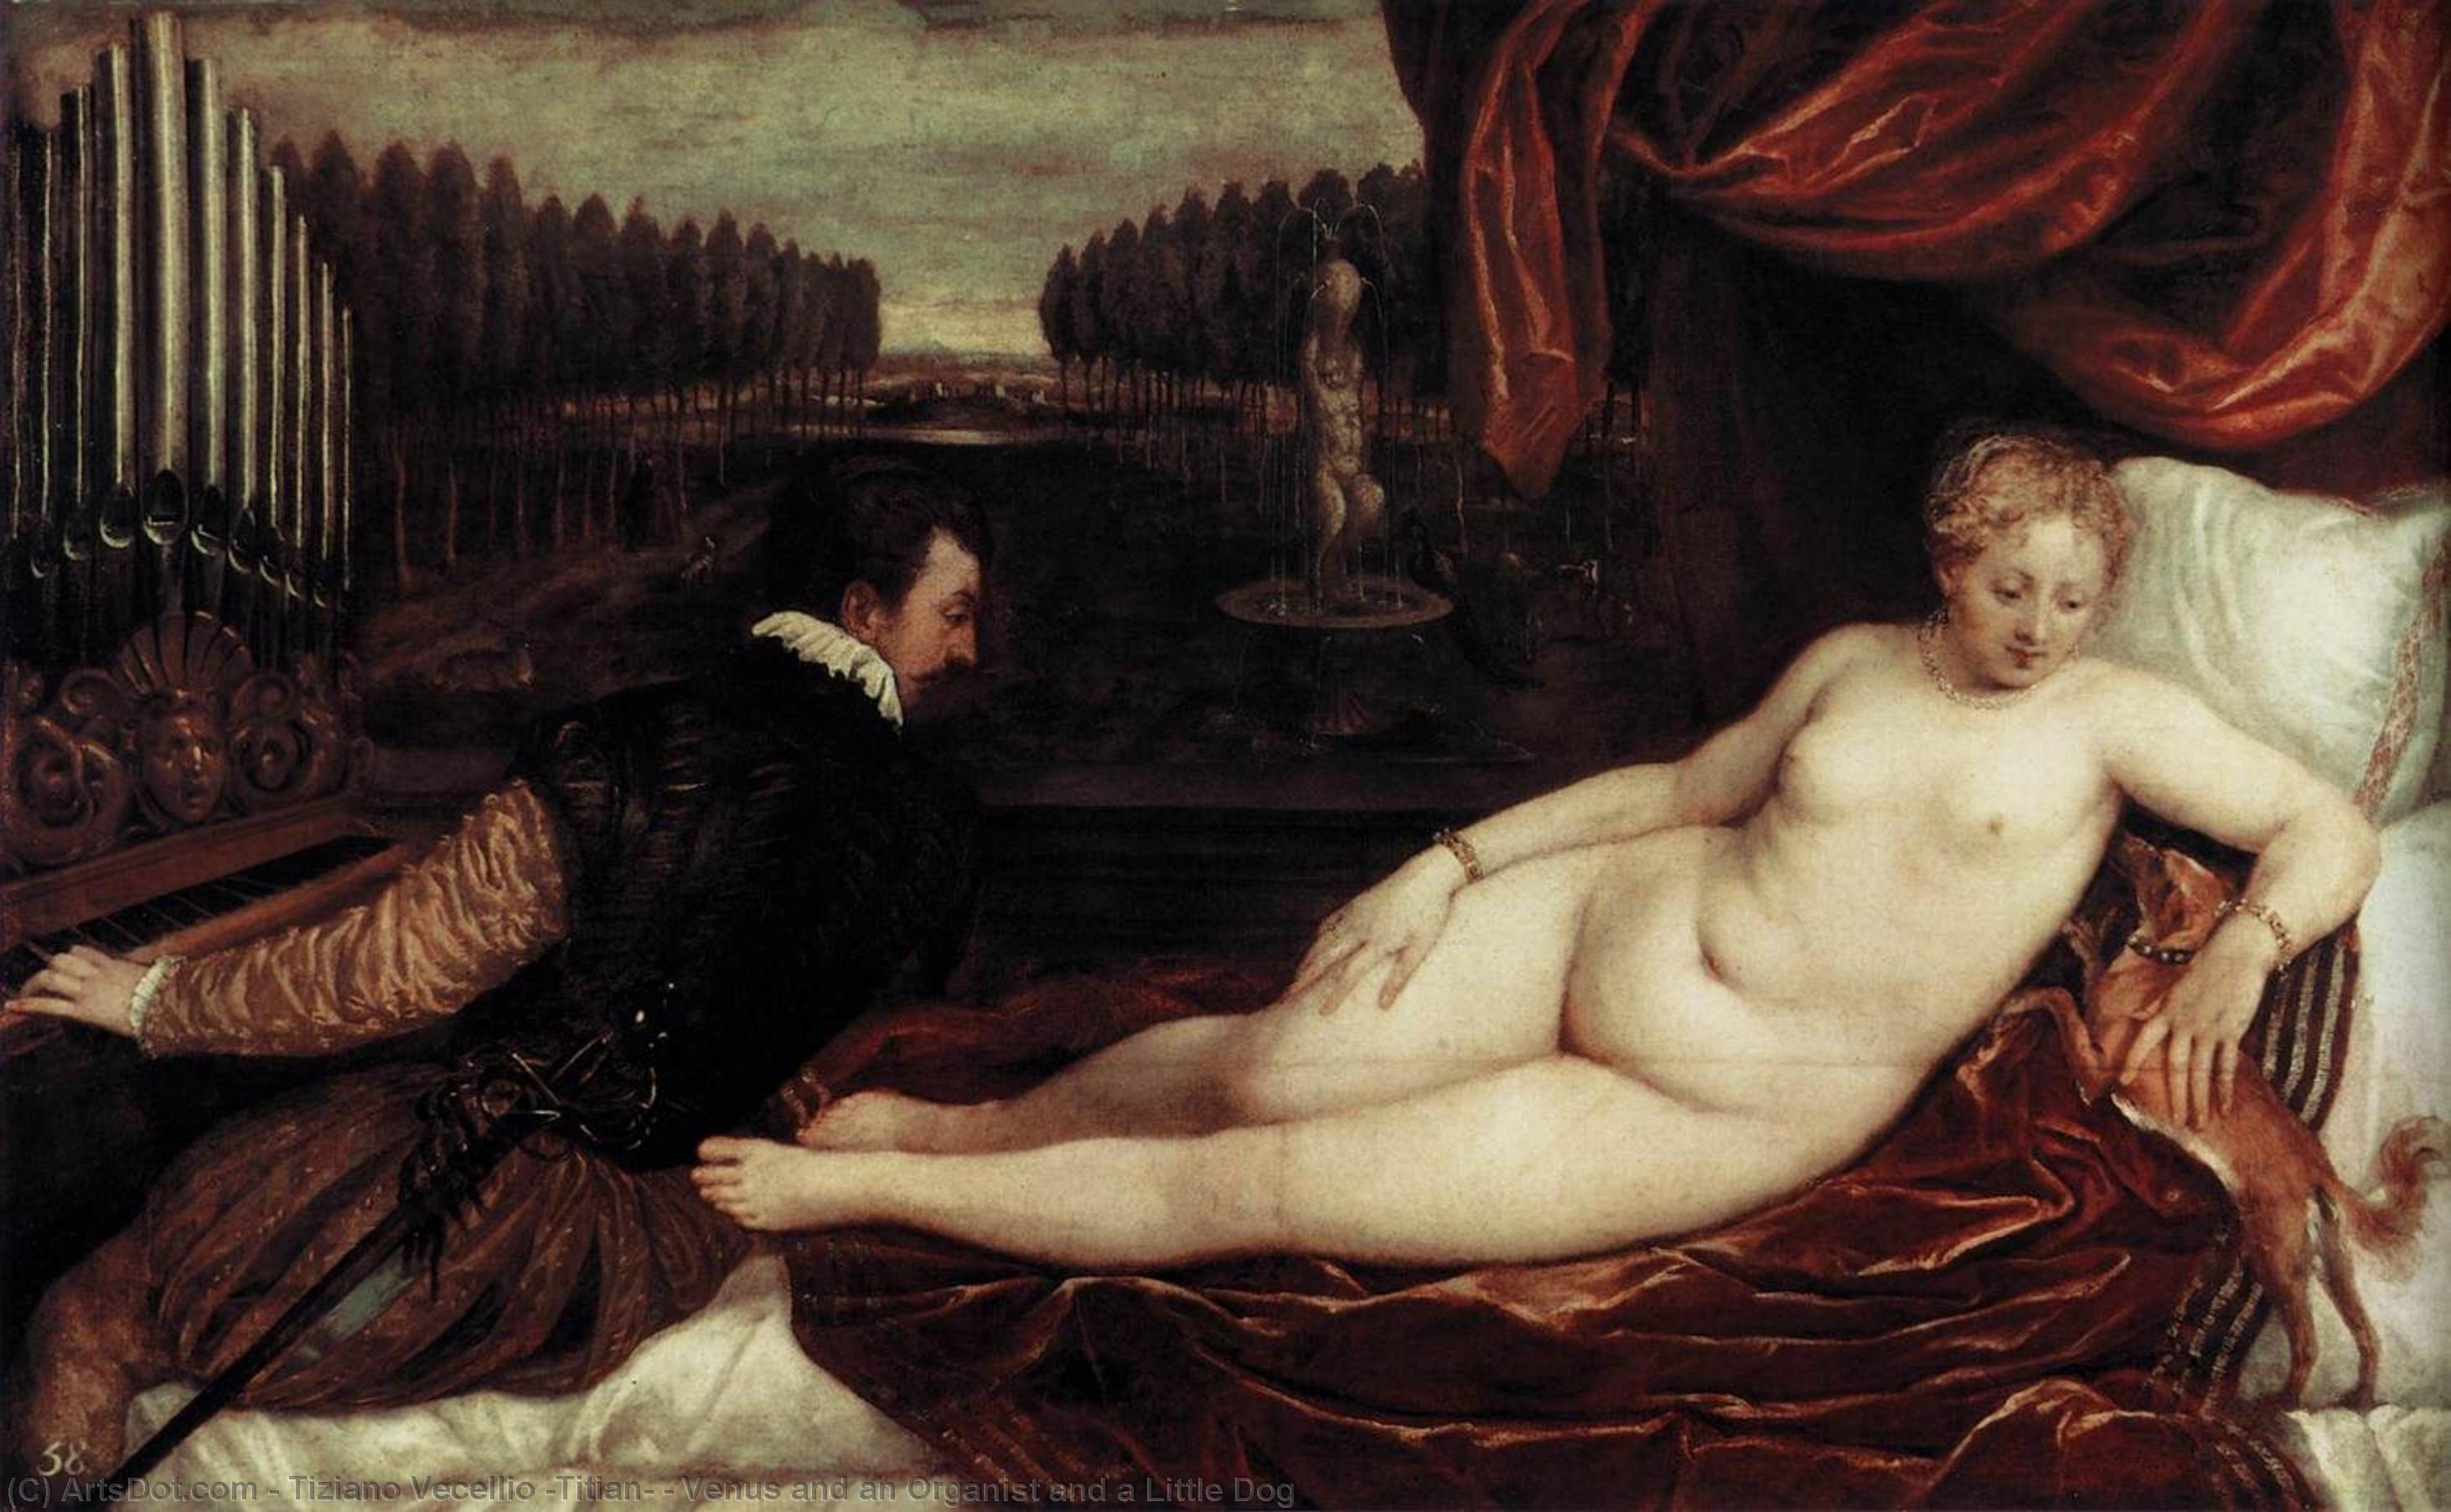 WikiOO.org - Encyclopedia of Fine Arts - Maleri, Artwork Tiziano Vecellio (Titian) - Venus and an Organist and a Little Dog